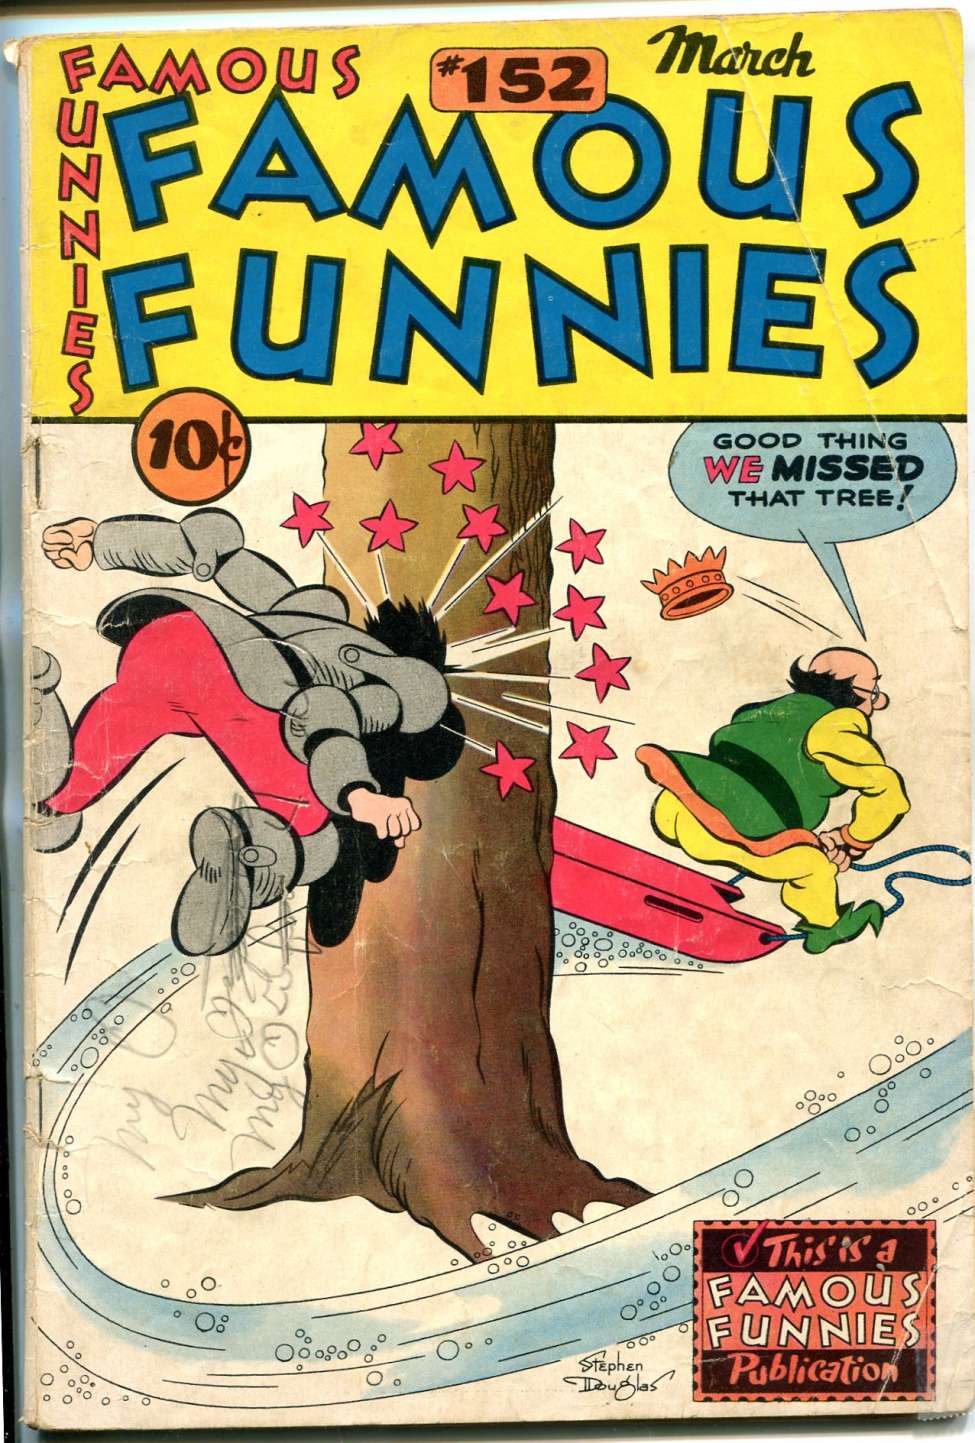 Book Cover For Famous Funnies 152